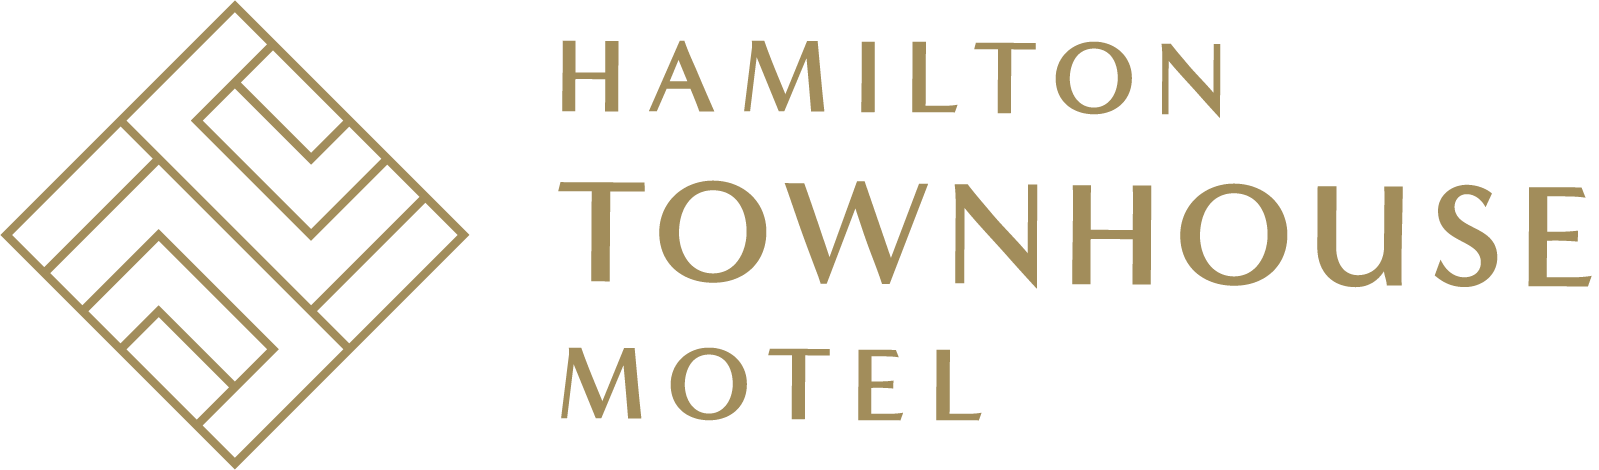 OFFICIAL SITE: Hamilton Townhouse Motel | Book Direct &amp; Save